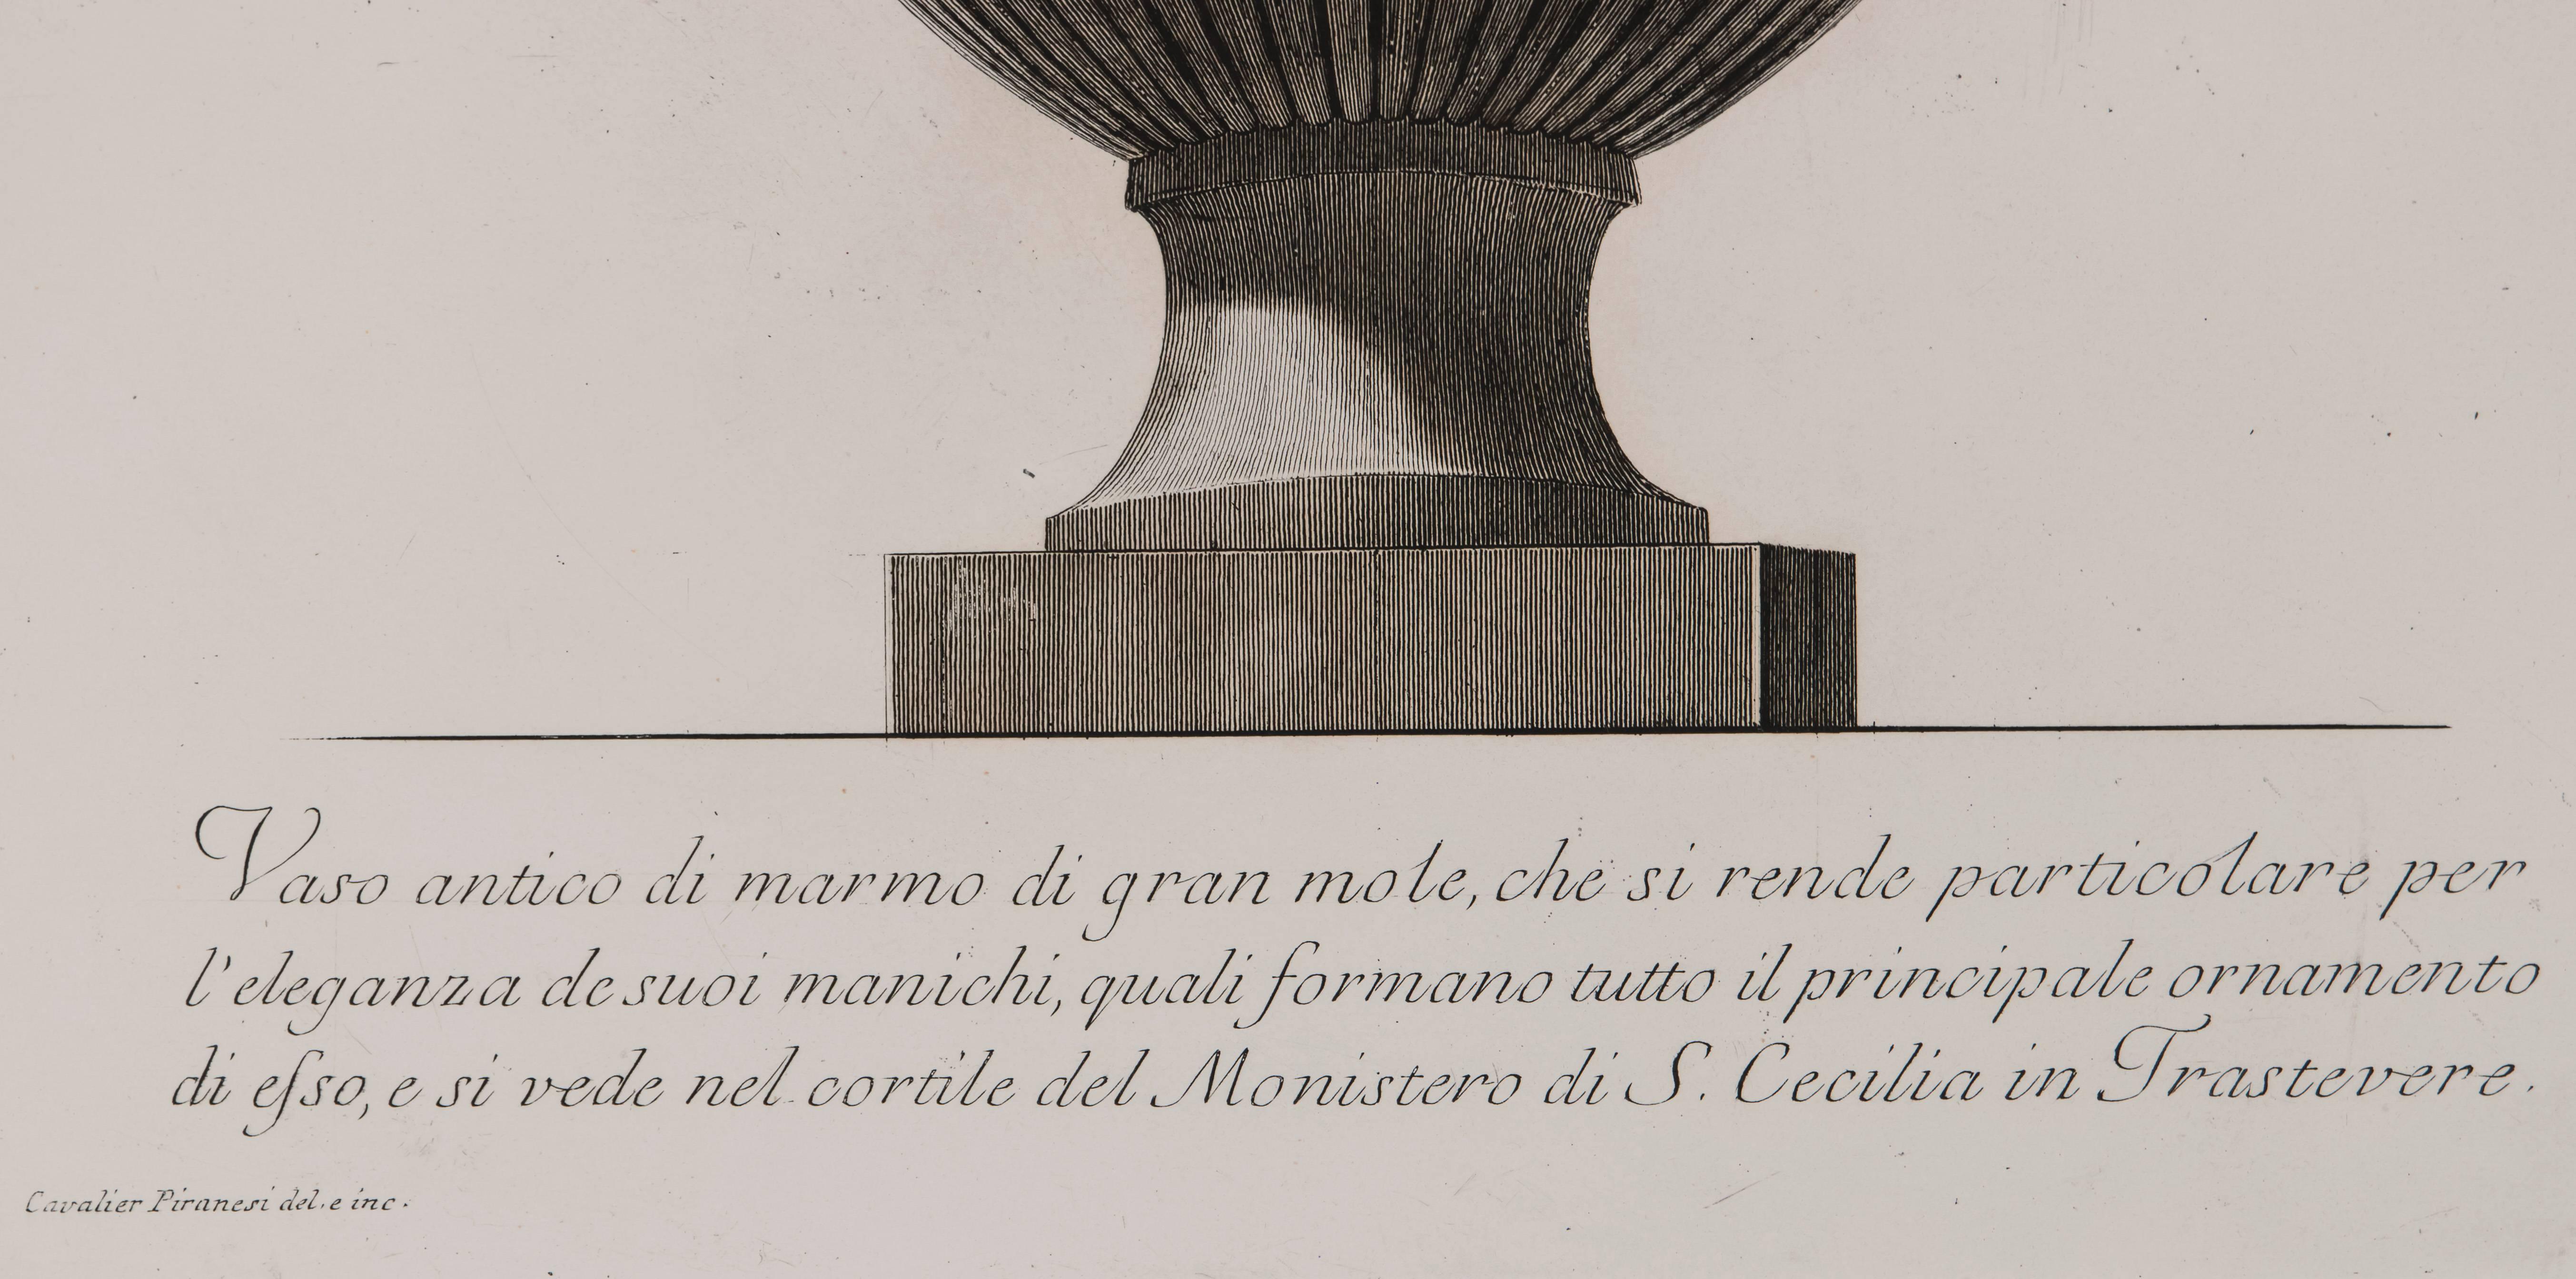 Beautifully framed Piranesi vase that will look beautiful in any room. Engraving of the marble vase in the courtyard of the Saint Cecilia Monastery in Trastevere, Italy, by Giovanni Battista Piranesi (1720-1778), the greatest engraver of ancient